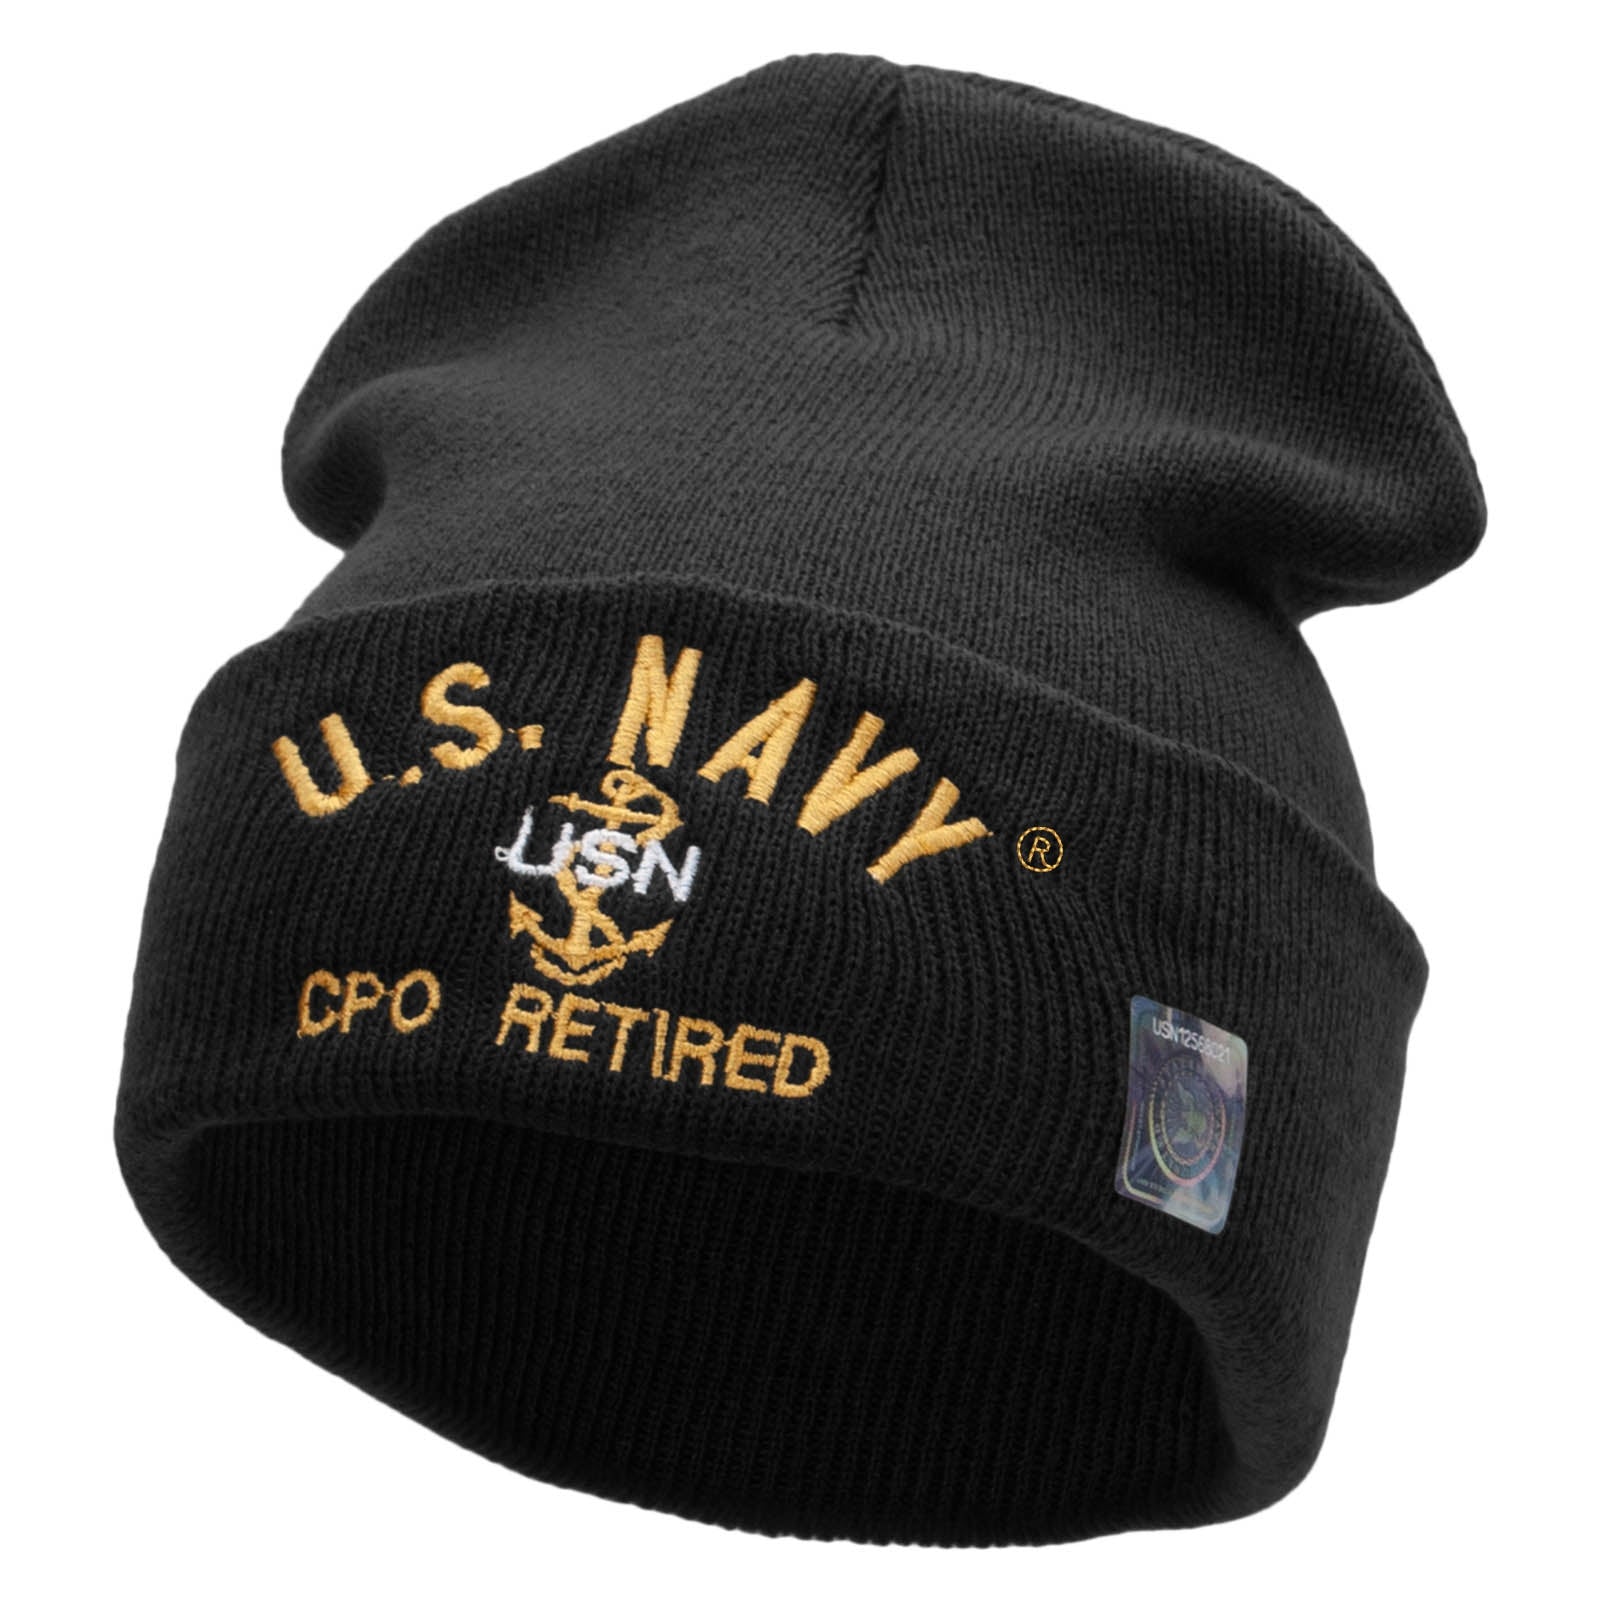 Licensed US Navy CPO Retired Logo Embroidered Long Beanie Made in USA - Black OSFM